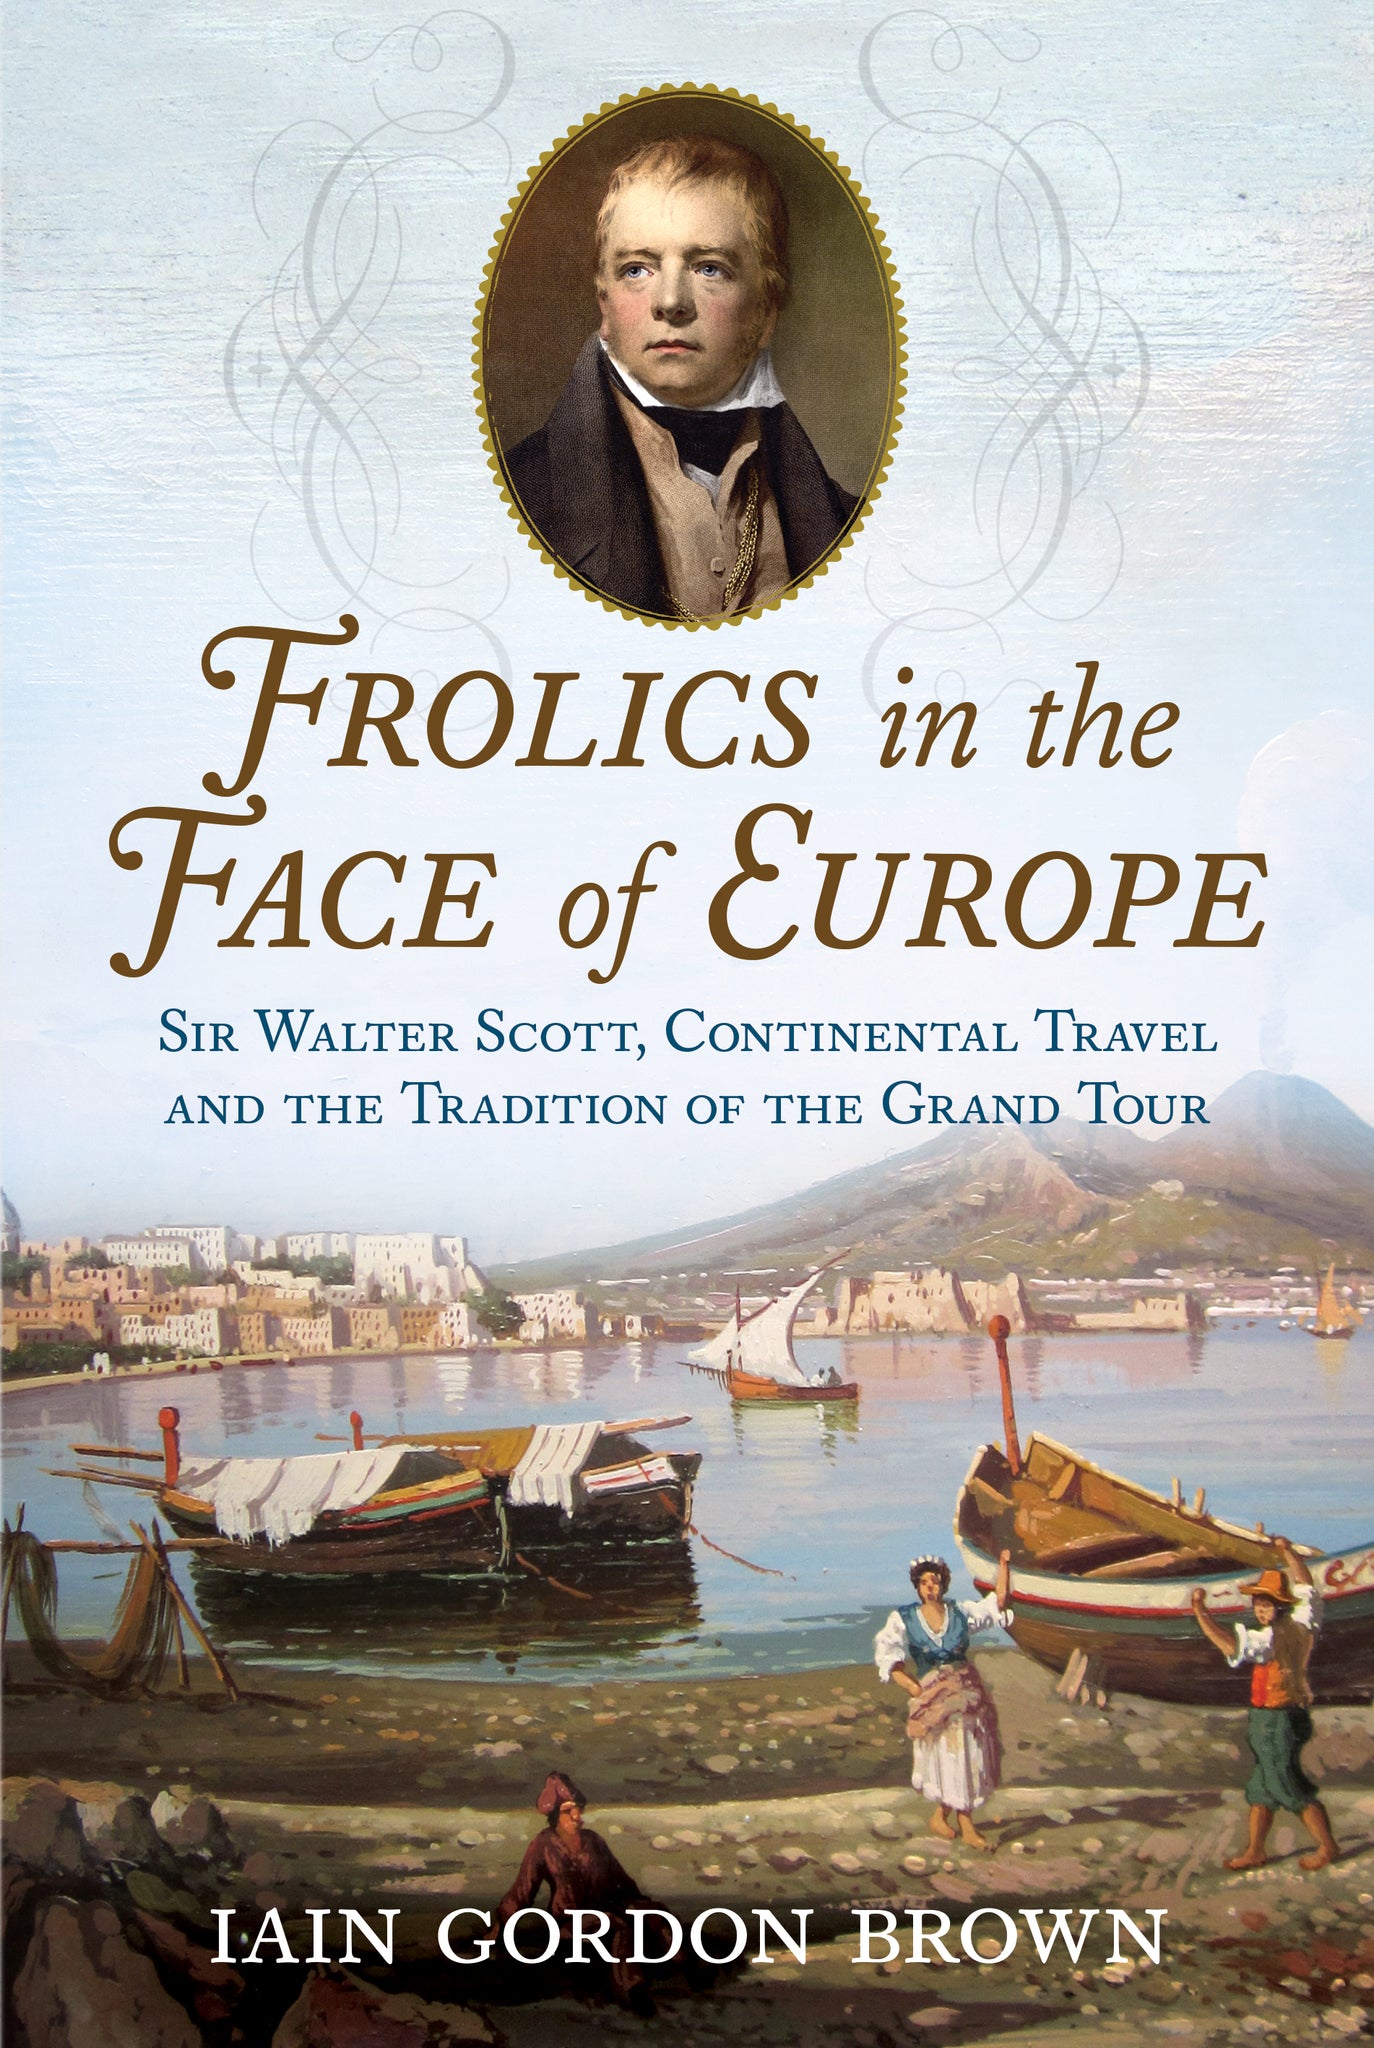 Frolics in the Face of Europe: Sir Walter Scott, Continental Travel and the Tradition of the Grand Tour